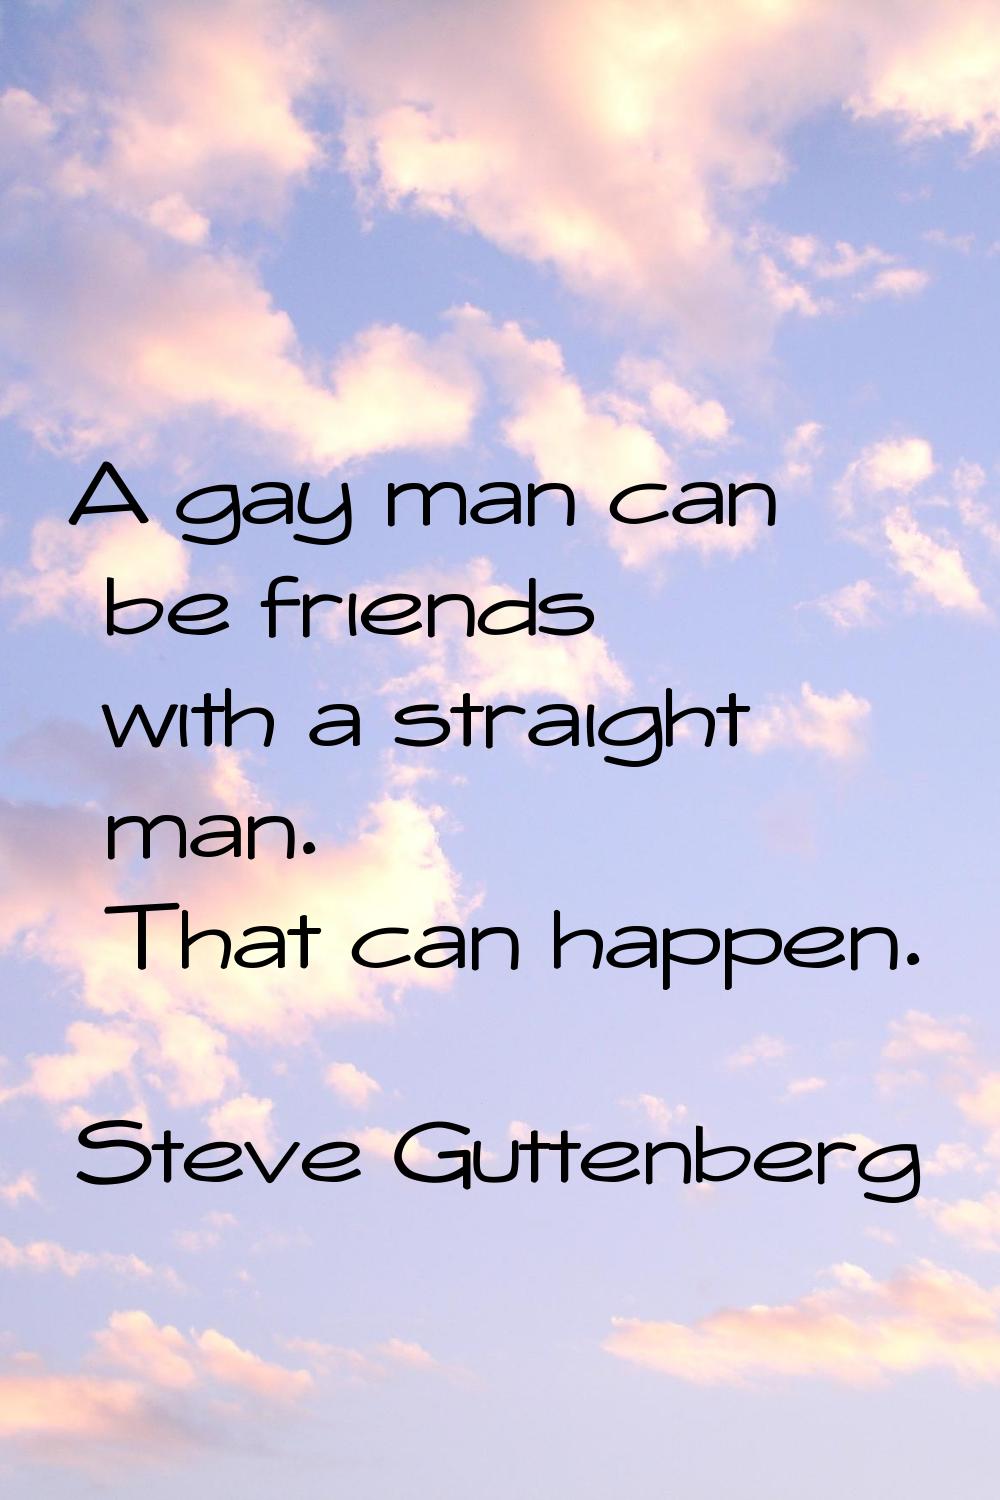 A gay man can be friends with a straight man. That can happen.